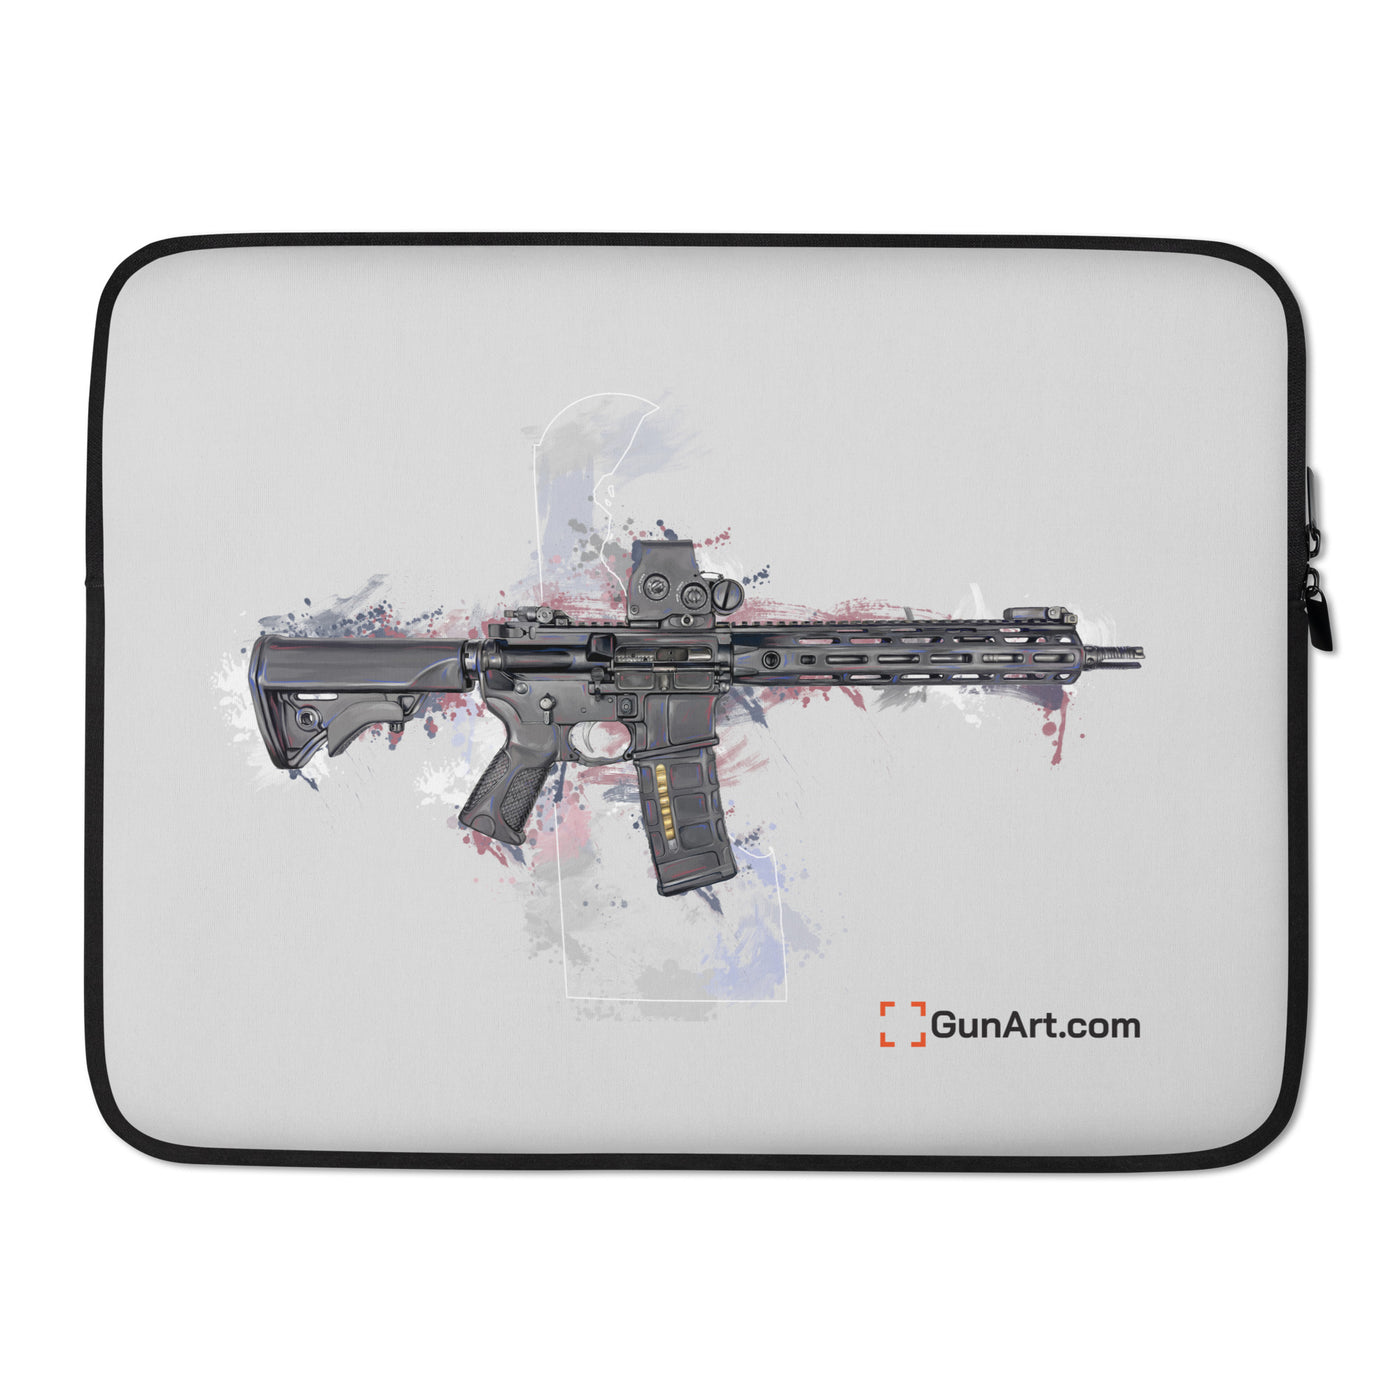 Defending Freedom - Delaware - AR-15 State Laptop Sleeve - White State